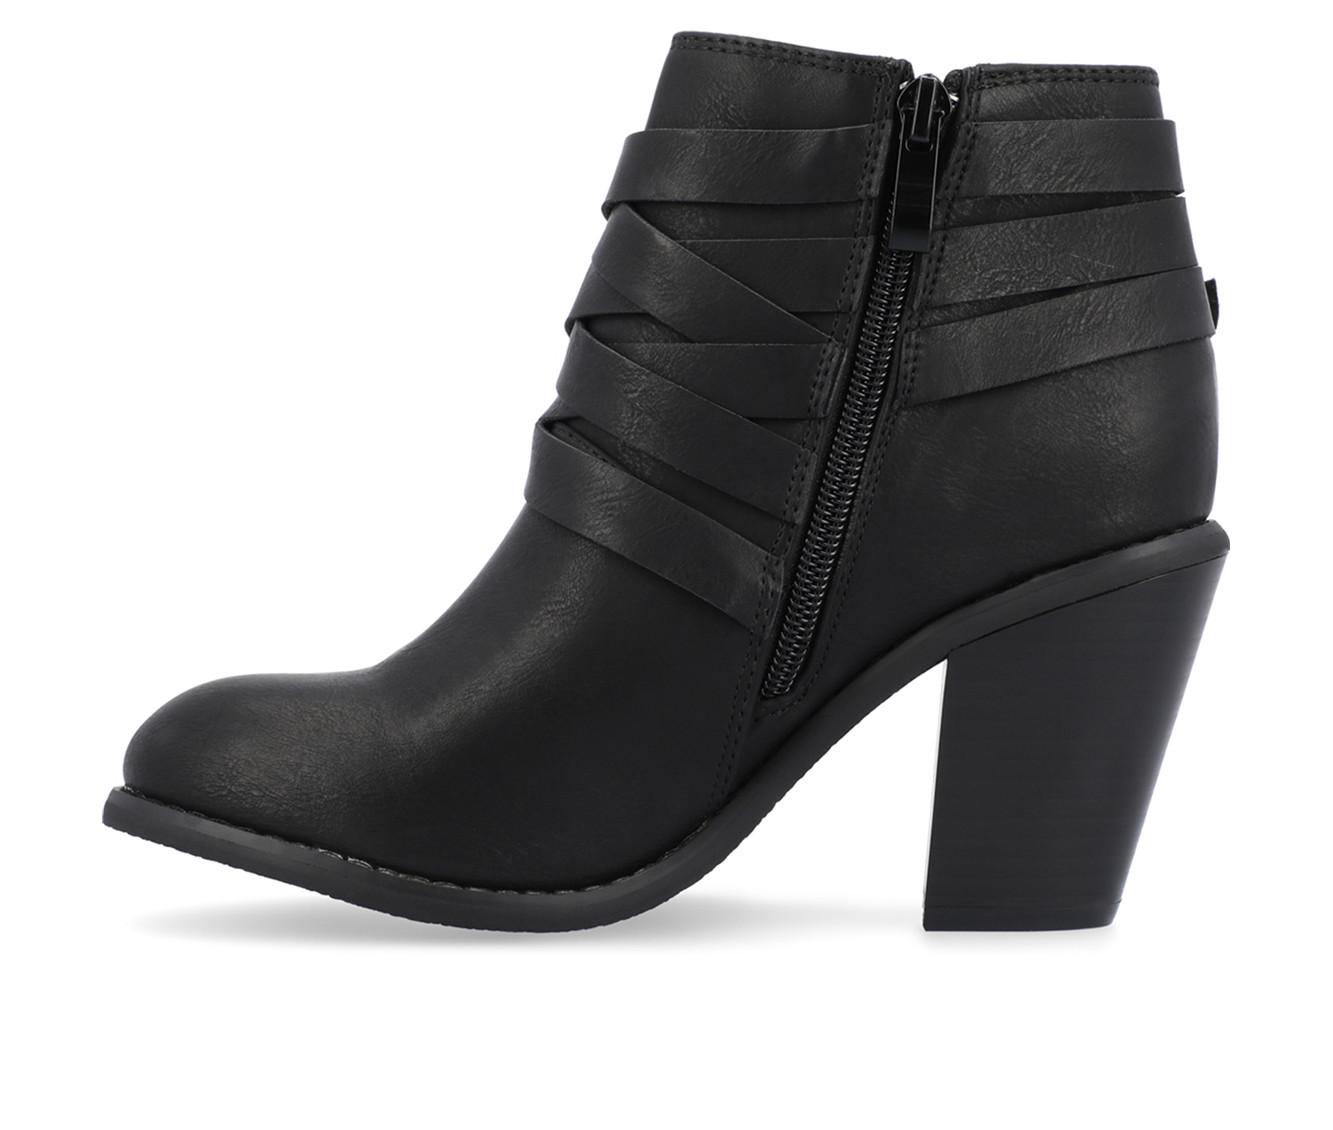 Women's Journee Collection Strap Booties | Shoe Carnival